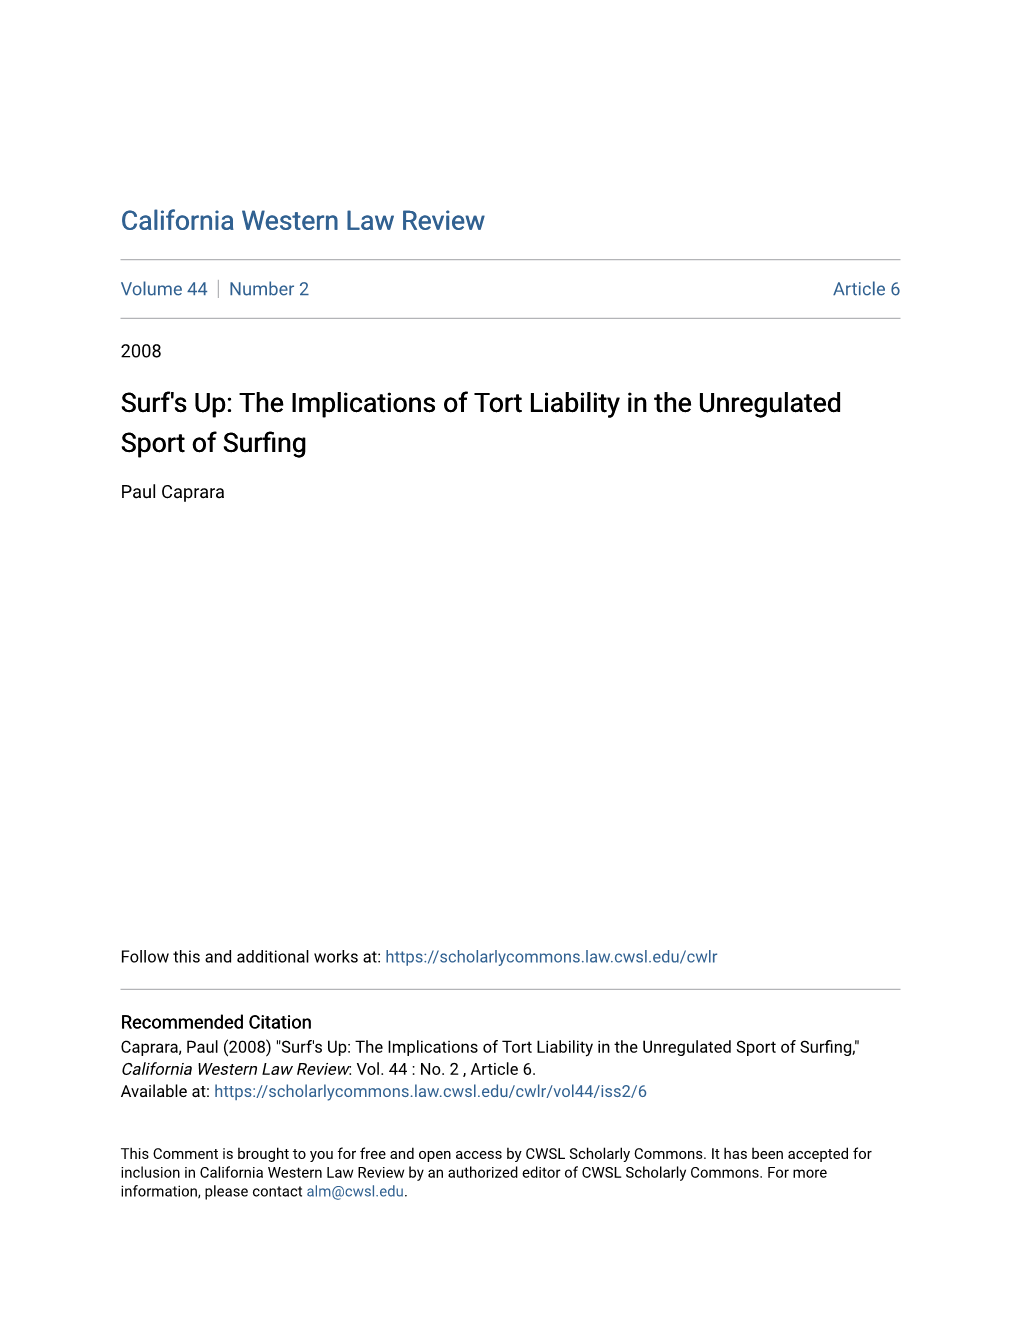 Surf's Up: the Implications of Tort Liability in the Unregulated Sport of Surfing